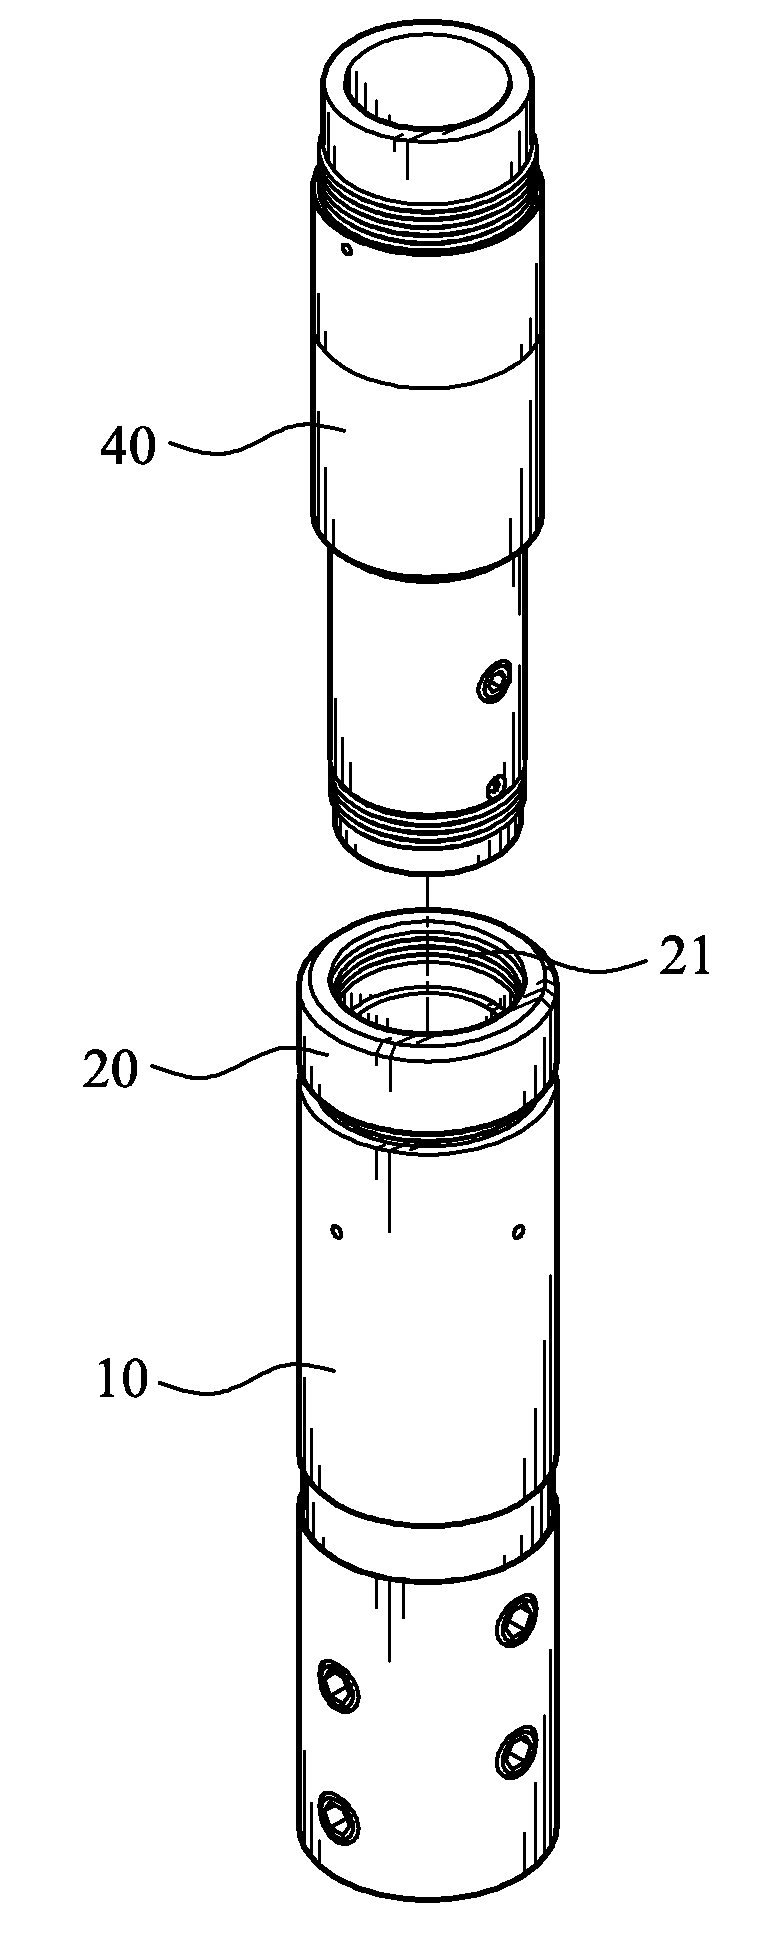 Throttle unit for dump bailer and method of blocking a water out zone in a production well utilizing the same